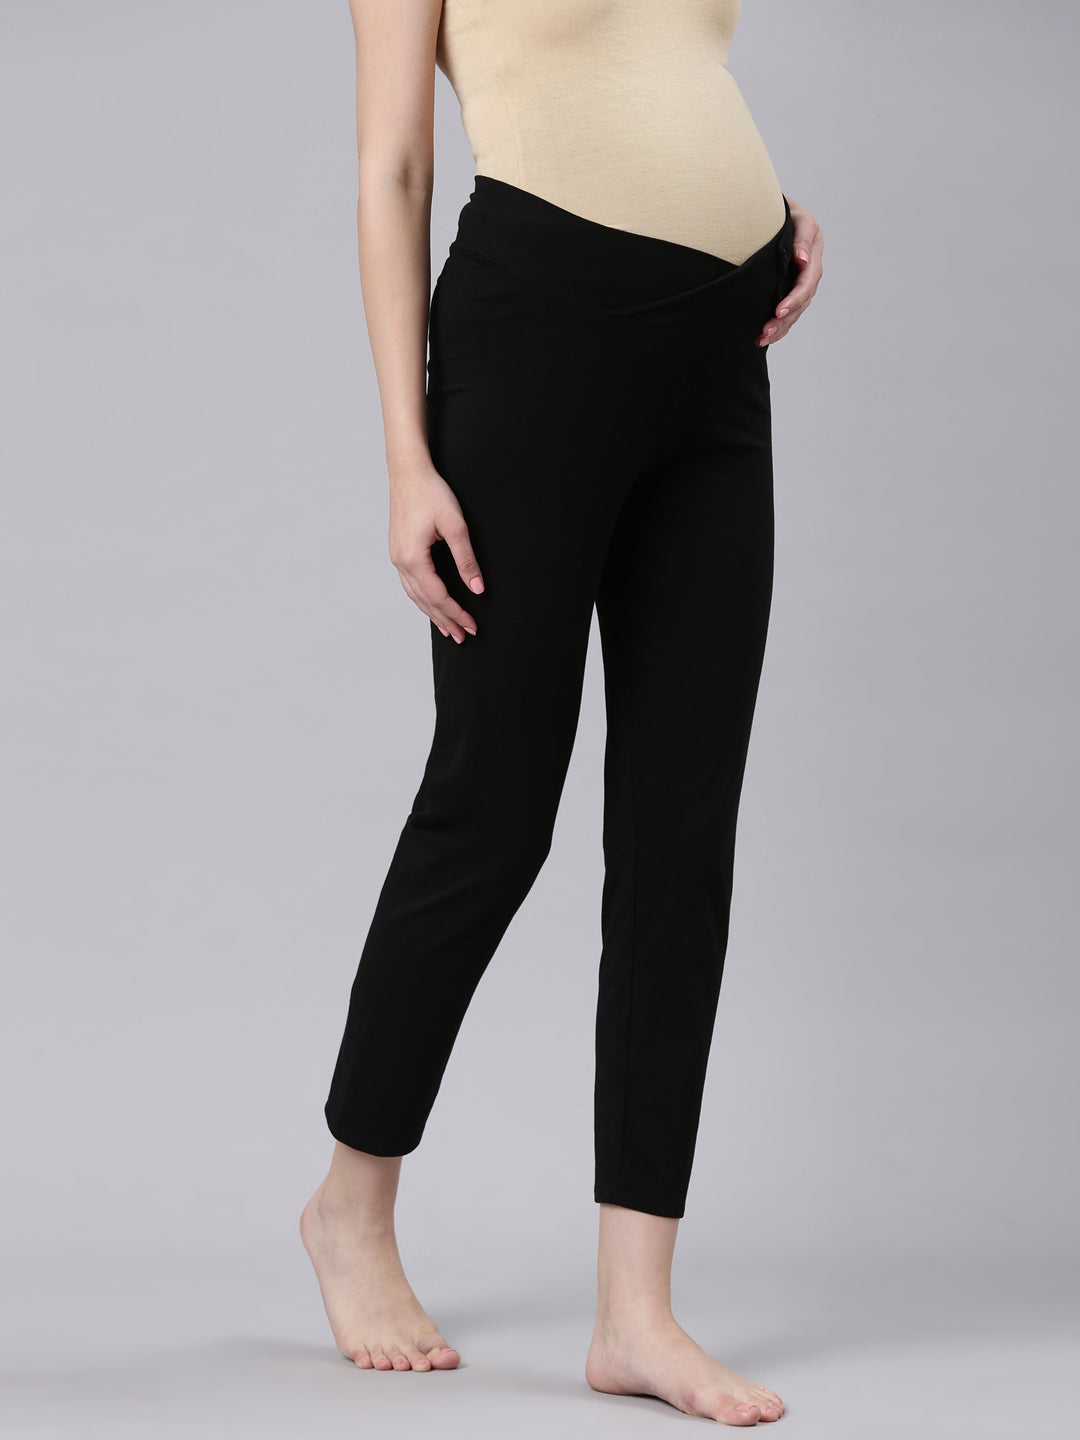 Winter High-Waisted Maternity Pants with Hip-Lifting and Body-Shaping  Support Adjustable Maternity Belly Leggings - AliExpress